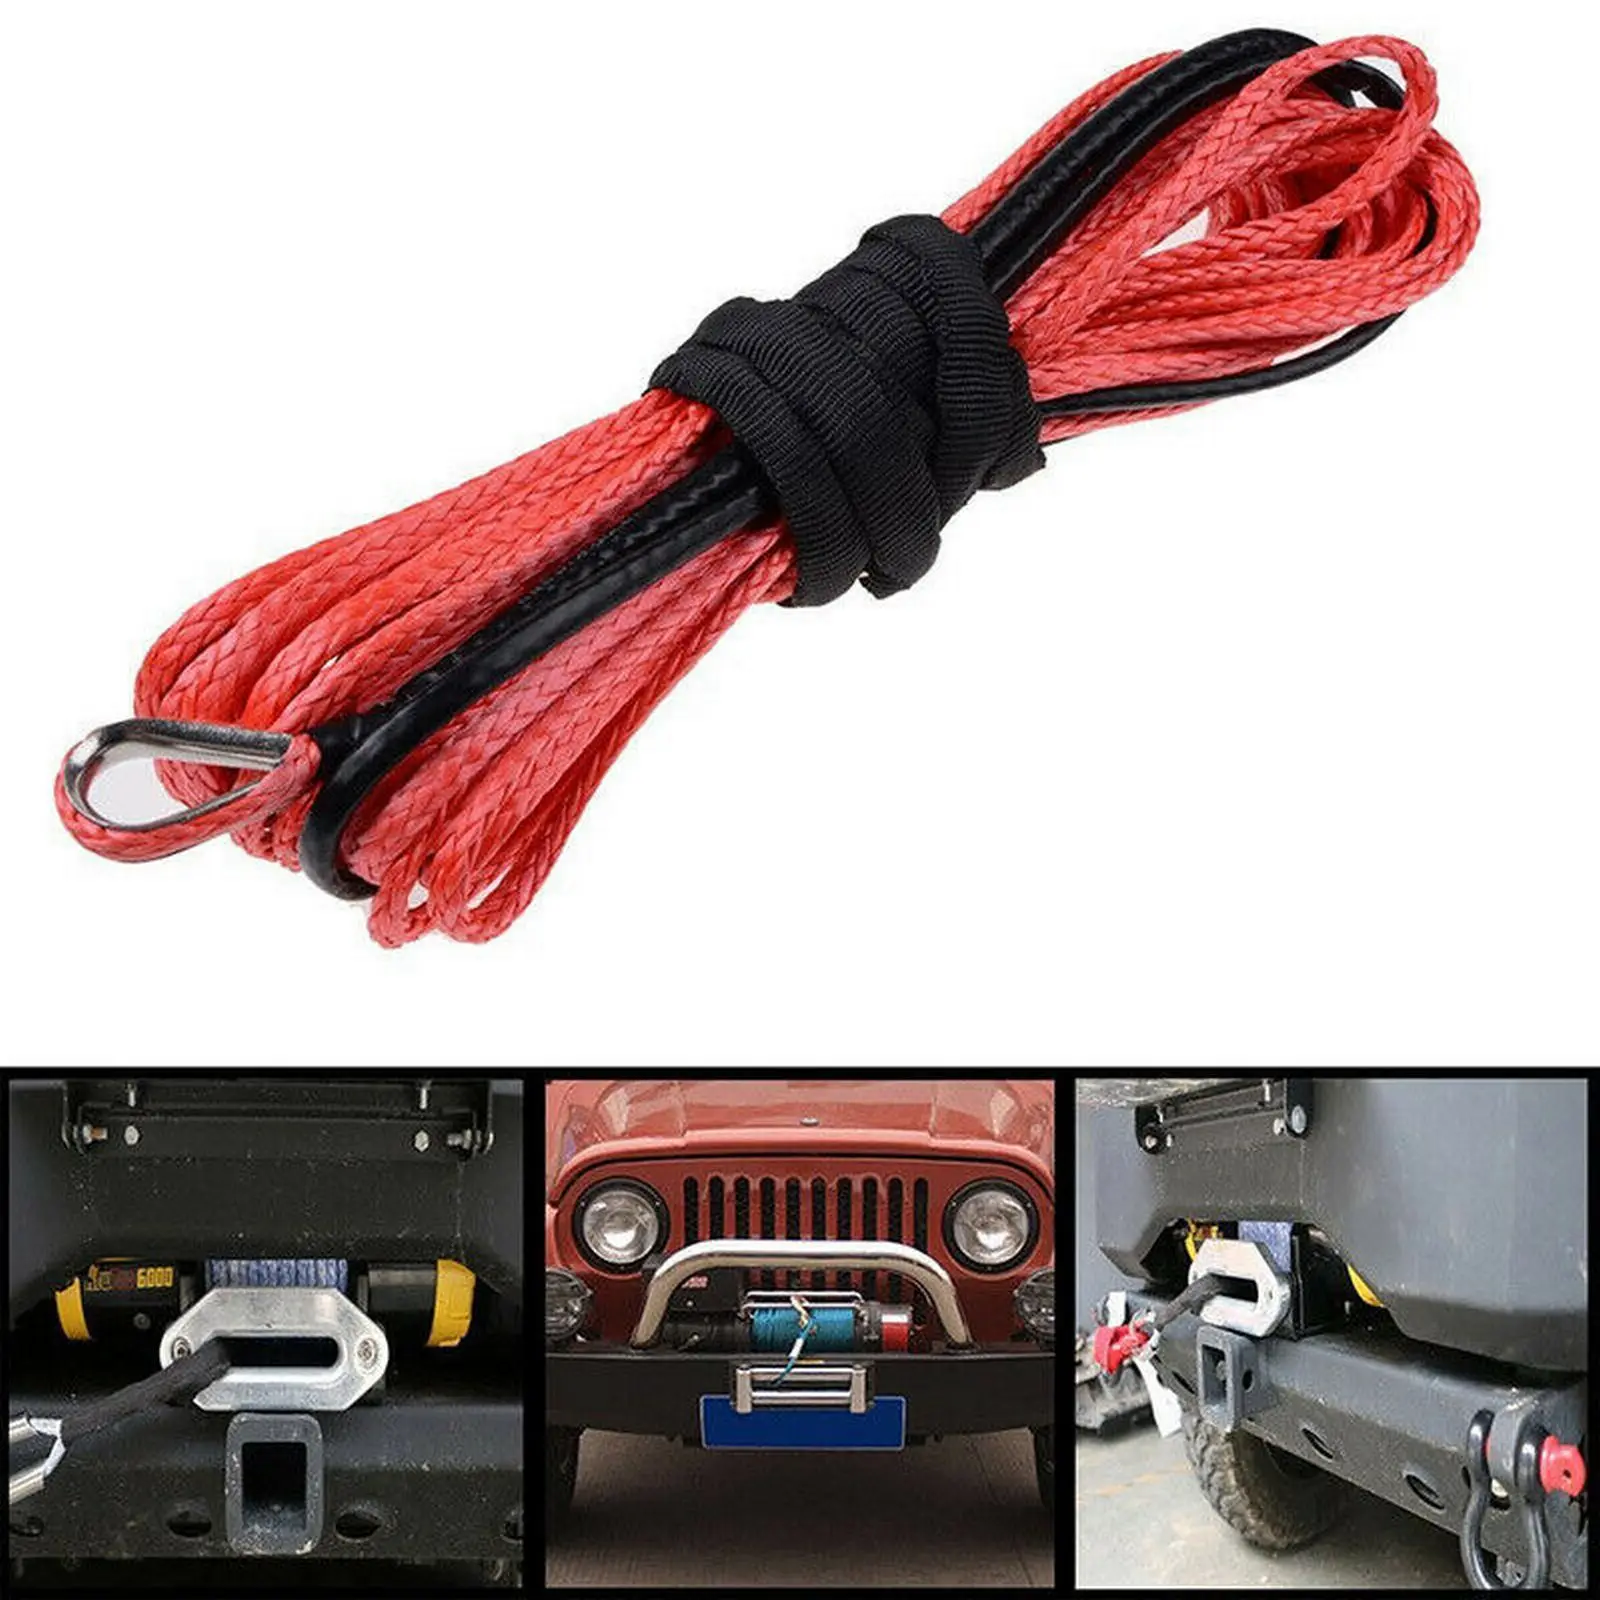 

7700lbs 15M Winch Rope String Kinetic Rope Pull Car Liberation Towing Accessories Drift Tuning 4x4 Off Road Accsesorios ATV